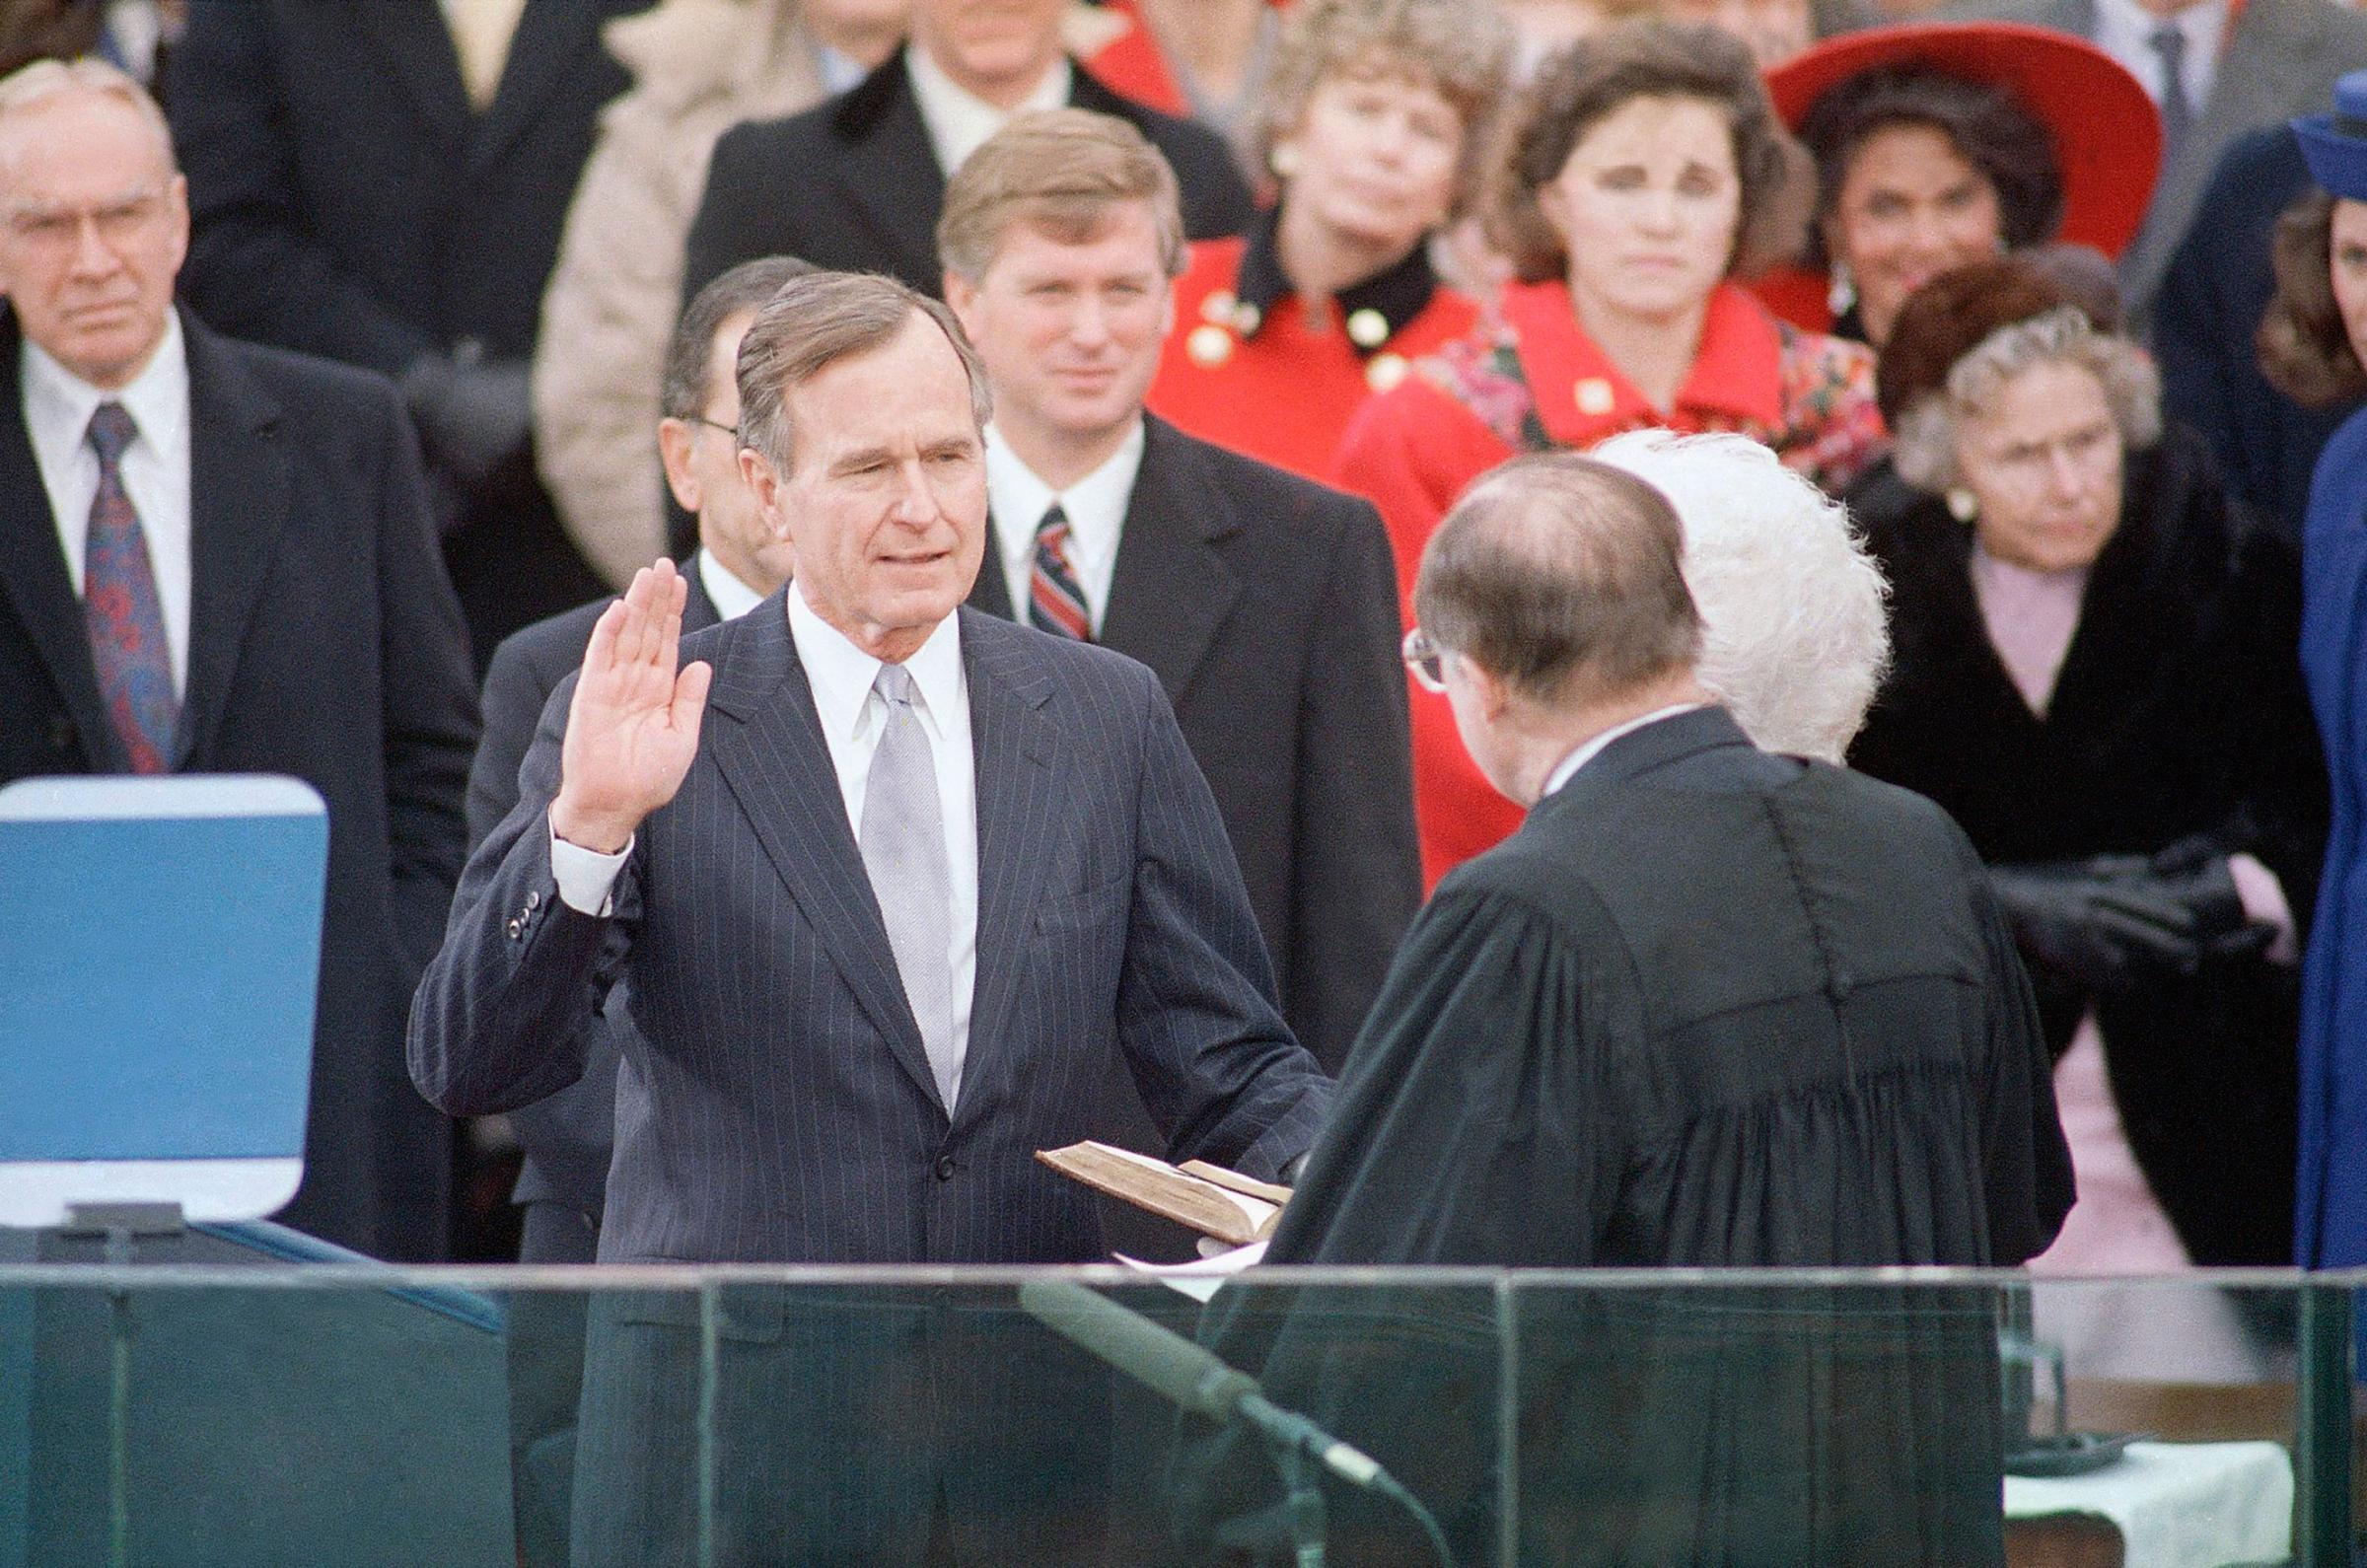 President George H. W. Bush raises his hand as he takes the oath of office as President of the United States outside the Capitol on Jan. 20, 1989, Washington, D.C.